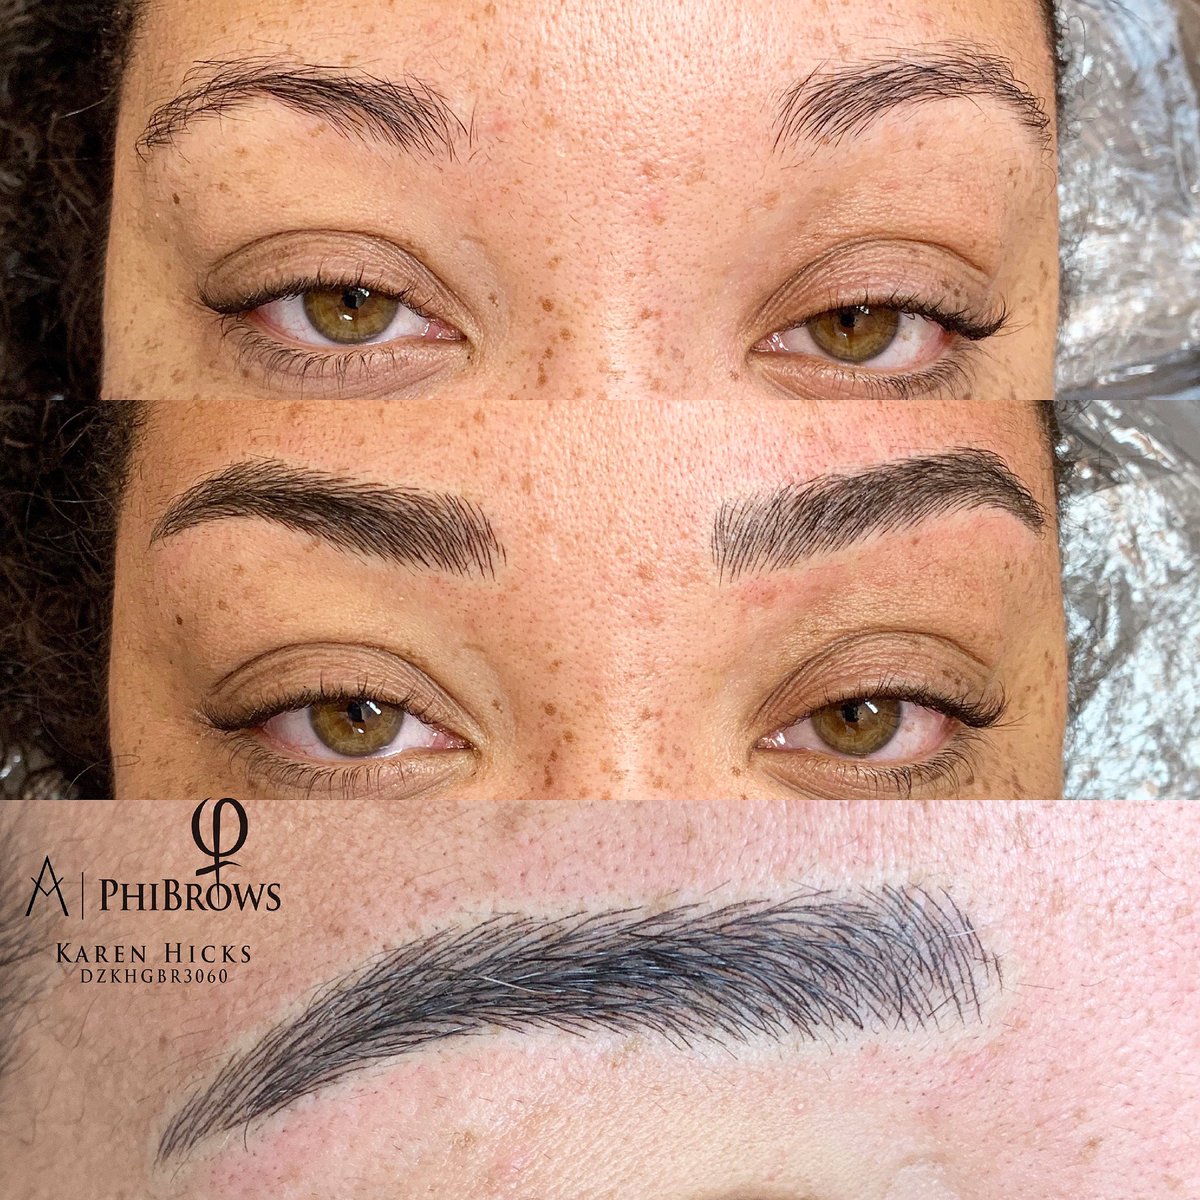 It’s all in the details. 
#phibrows #phibrowstylist #microbladingeyebrows #microblading #eyebrows #hairstrokebrows #semipermanenteyebrows #natural #bblogger #surrey #london #caterham #croydon #reigate #redhill #microbladingsurrey #tattoobrows